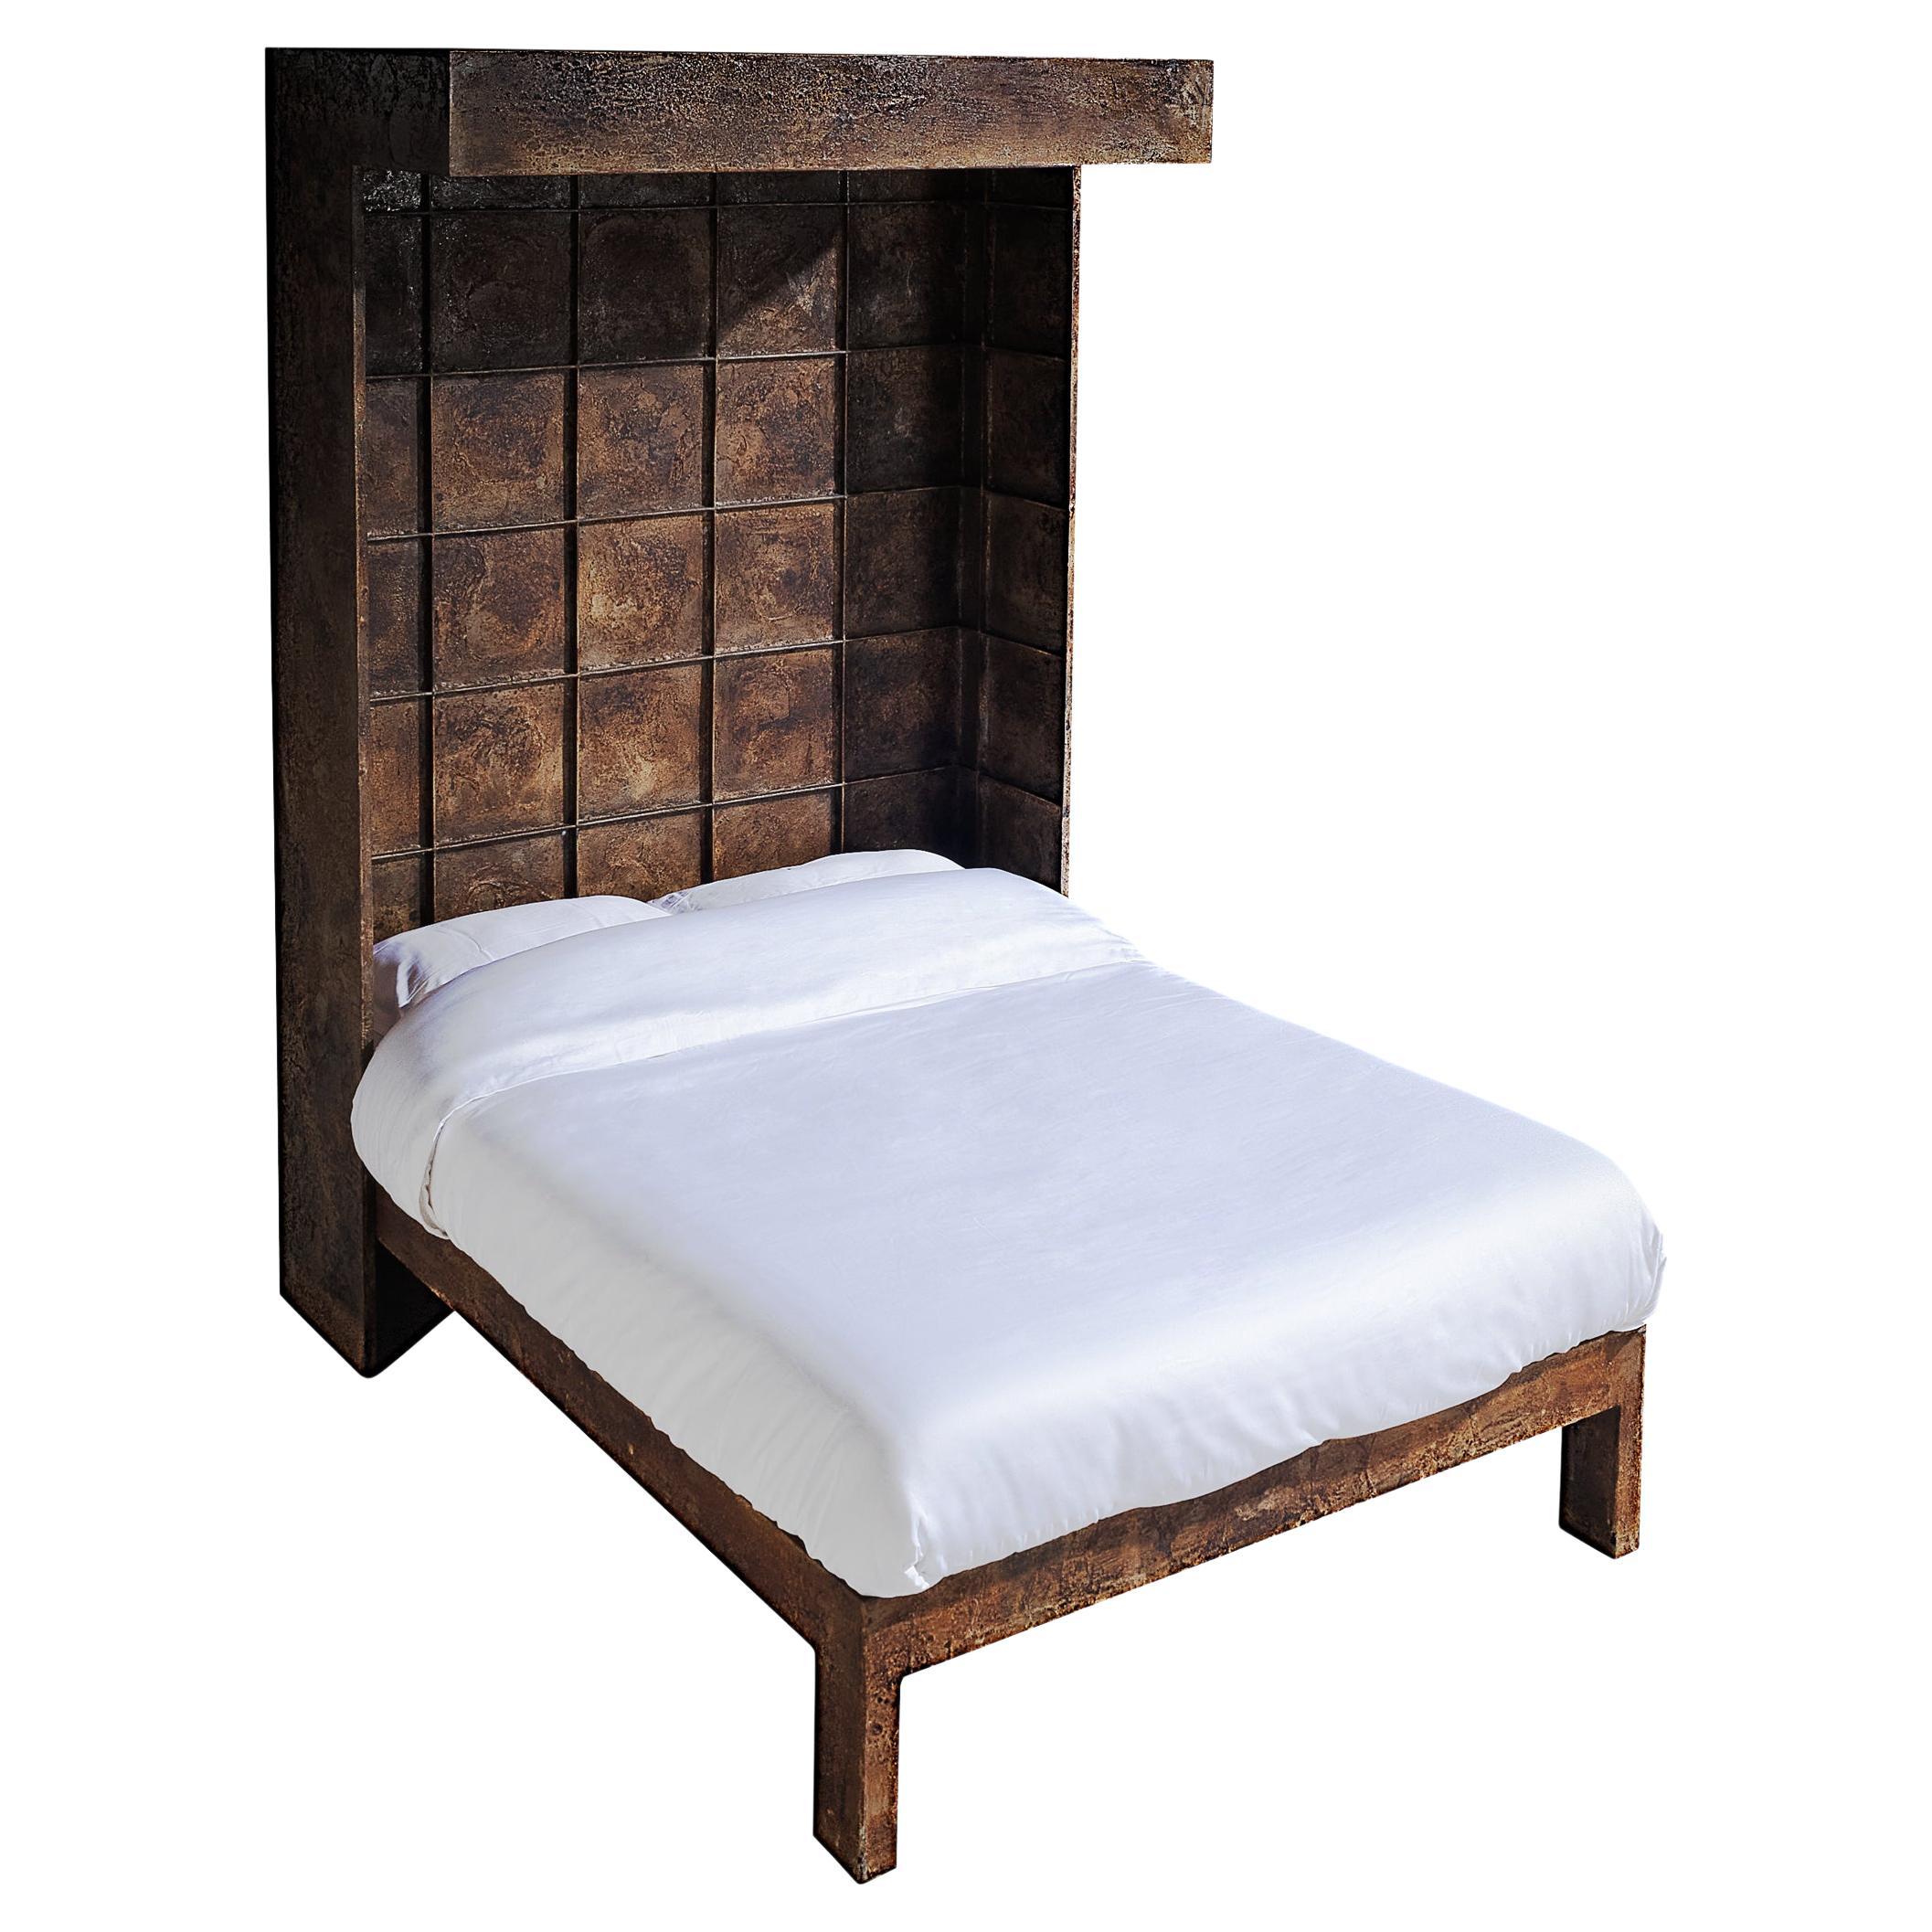 Pia Manu Unique Handcrafted Kingsize Bed in Wrought Iron